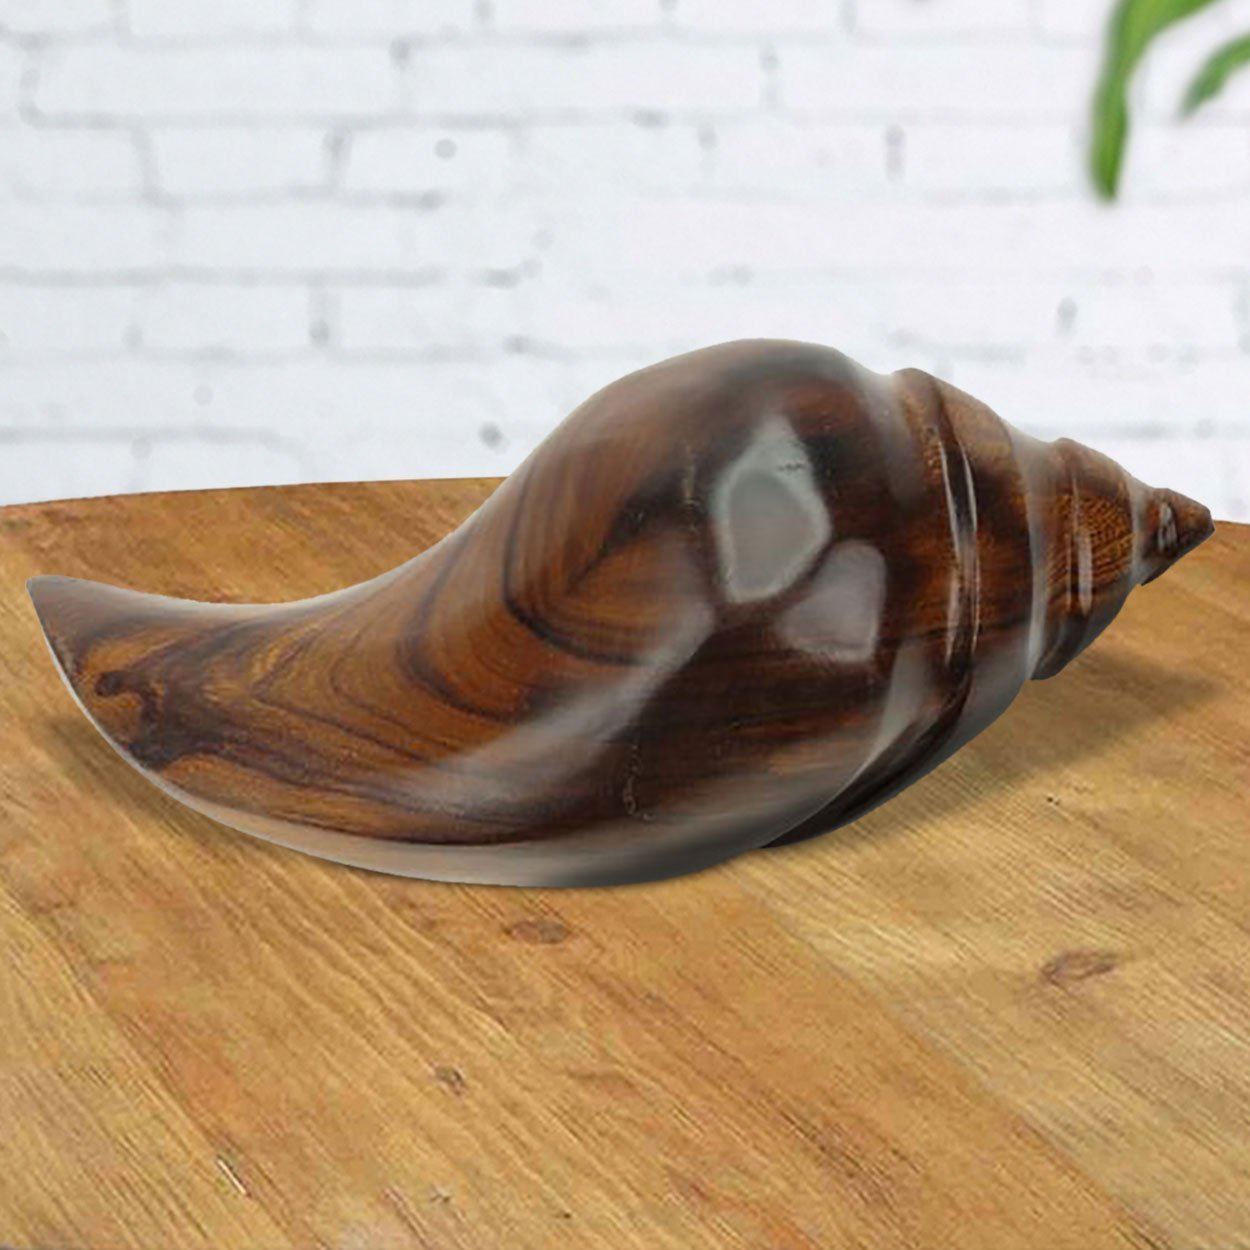 172249 - 5in Long Conch Shell Ironwood Carving